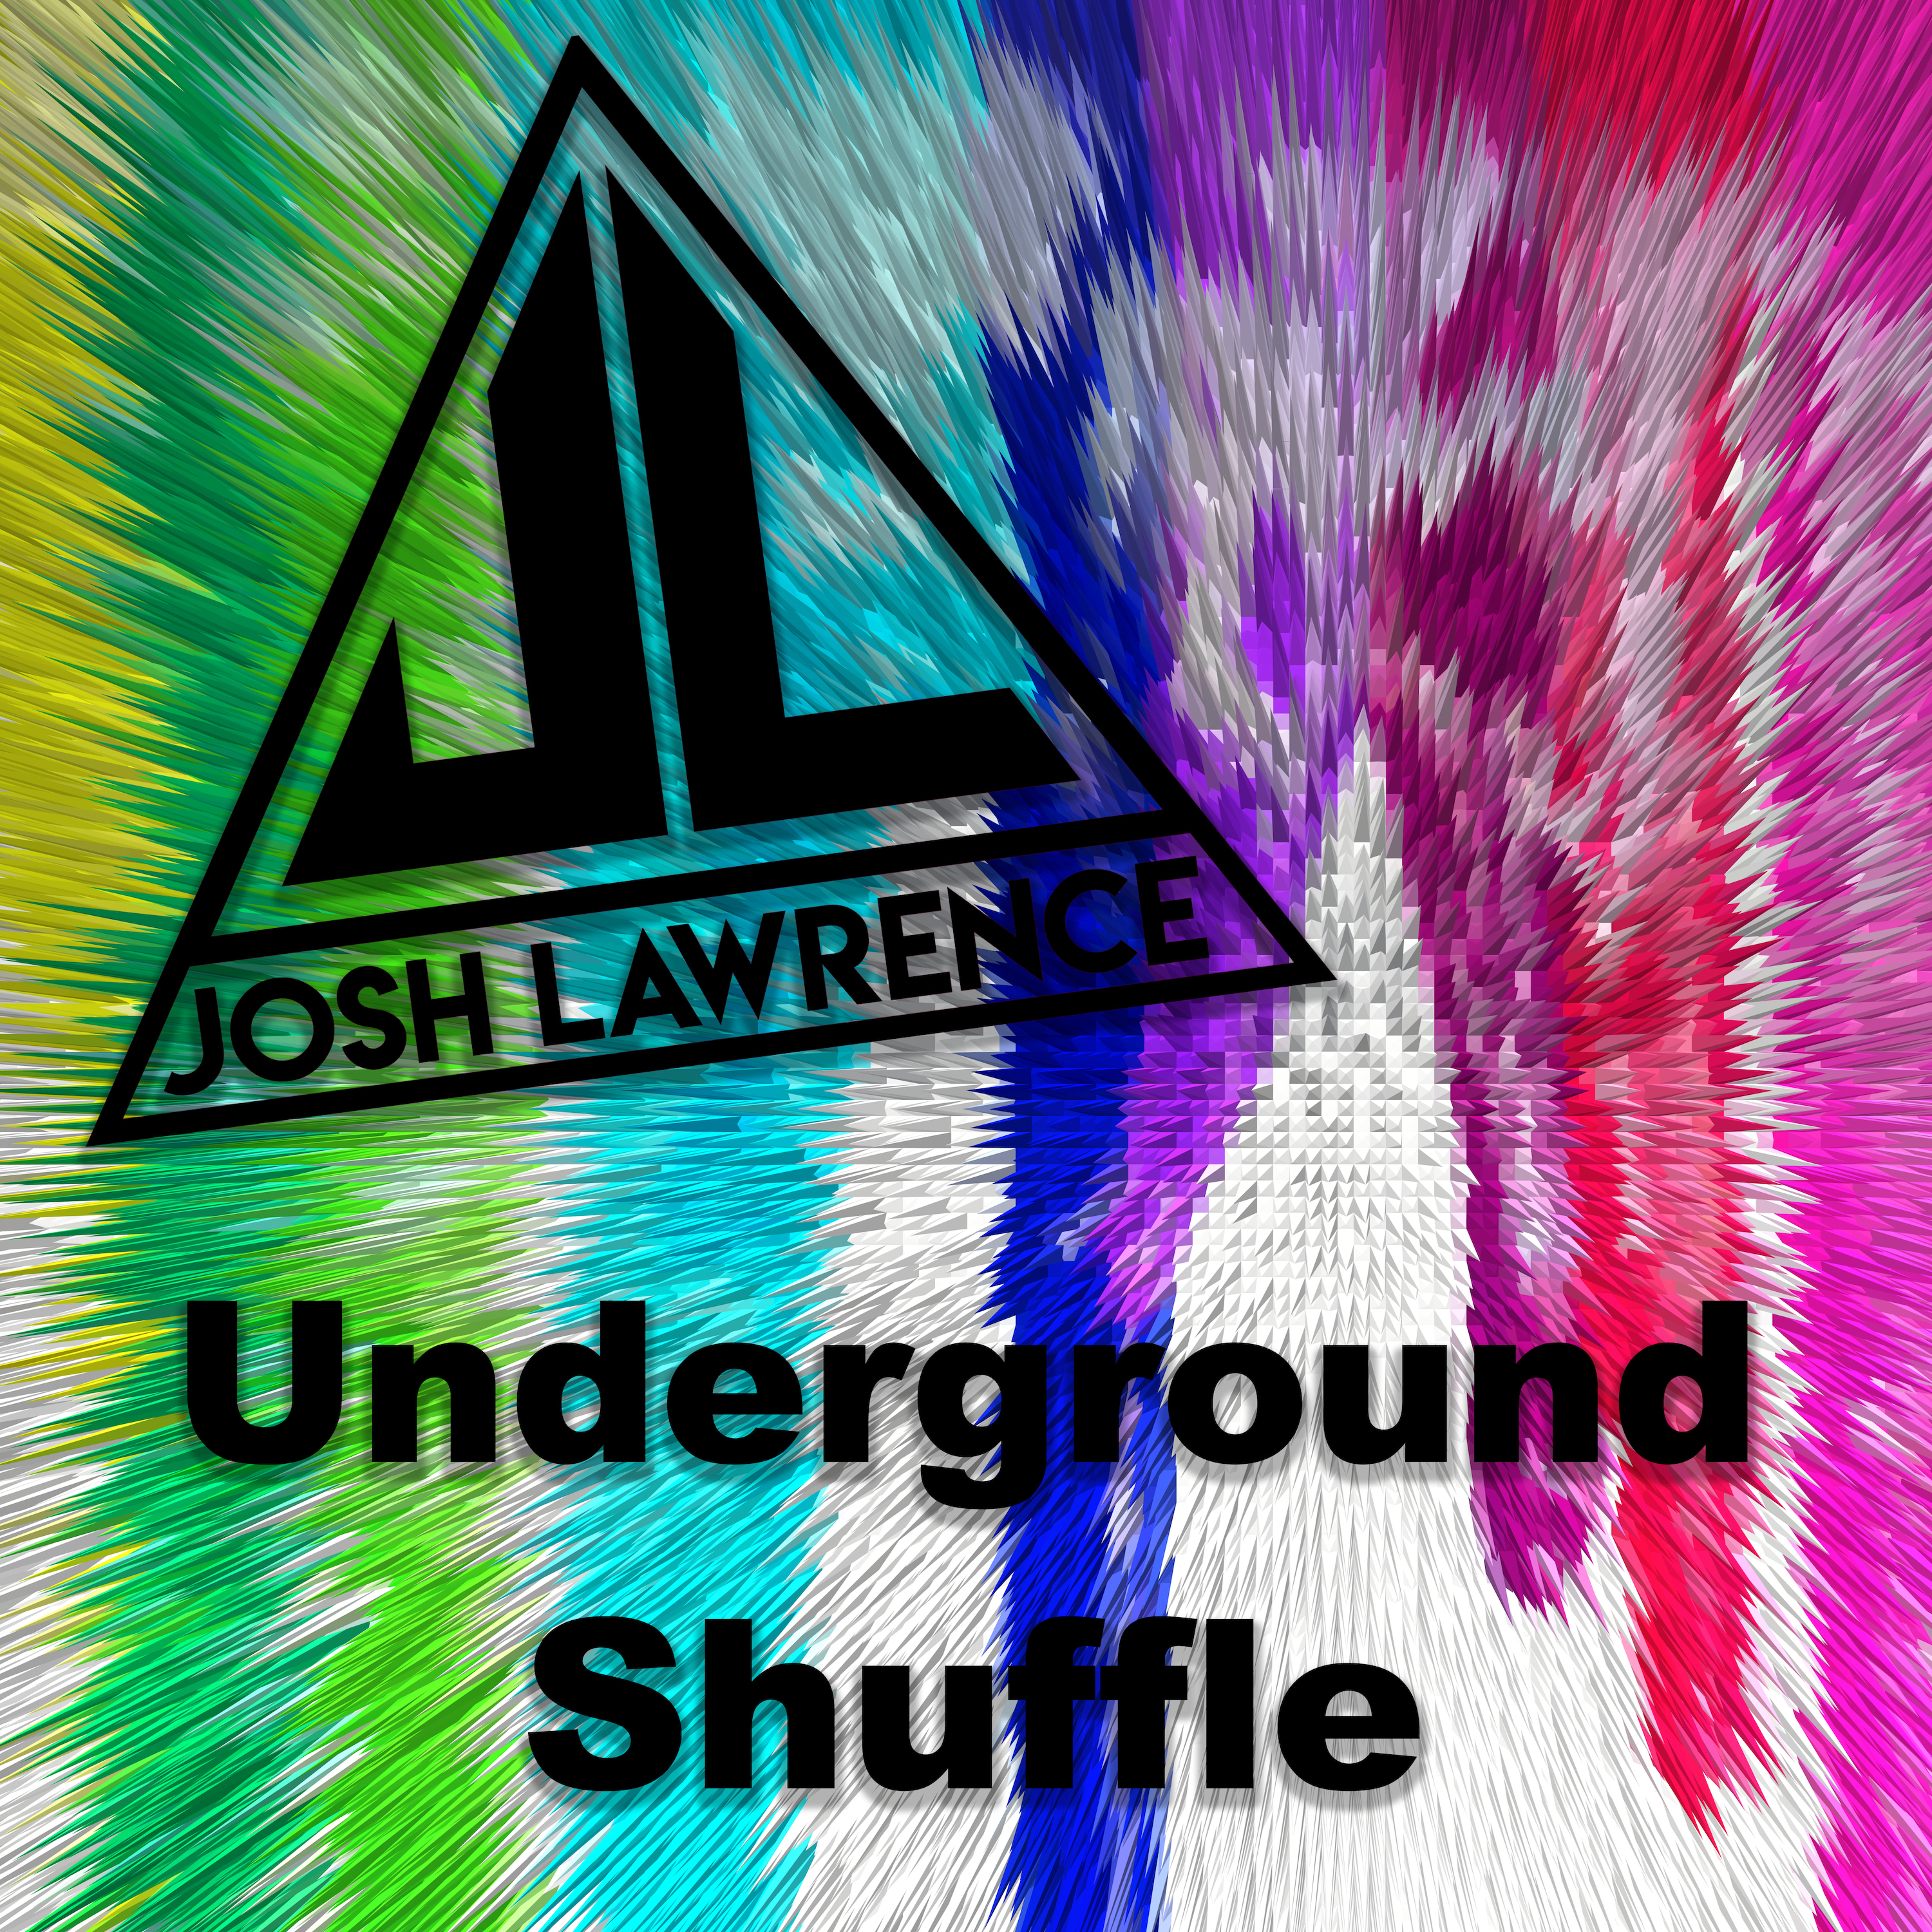 Album cover for 'Underground Shuffle,' a high-energy big room mainstage track by Josh Lawrence, featuring dynamic artwork that echoes the powerful and electrifying atmosphere of the music.